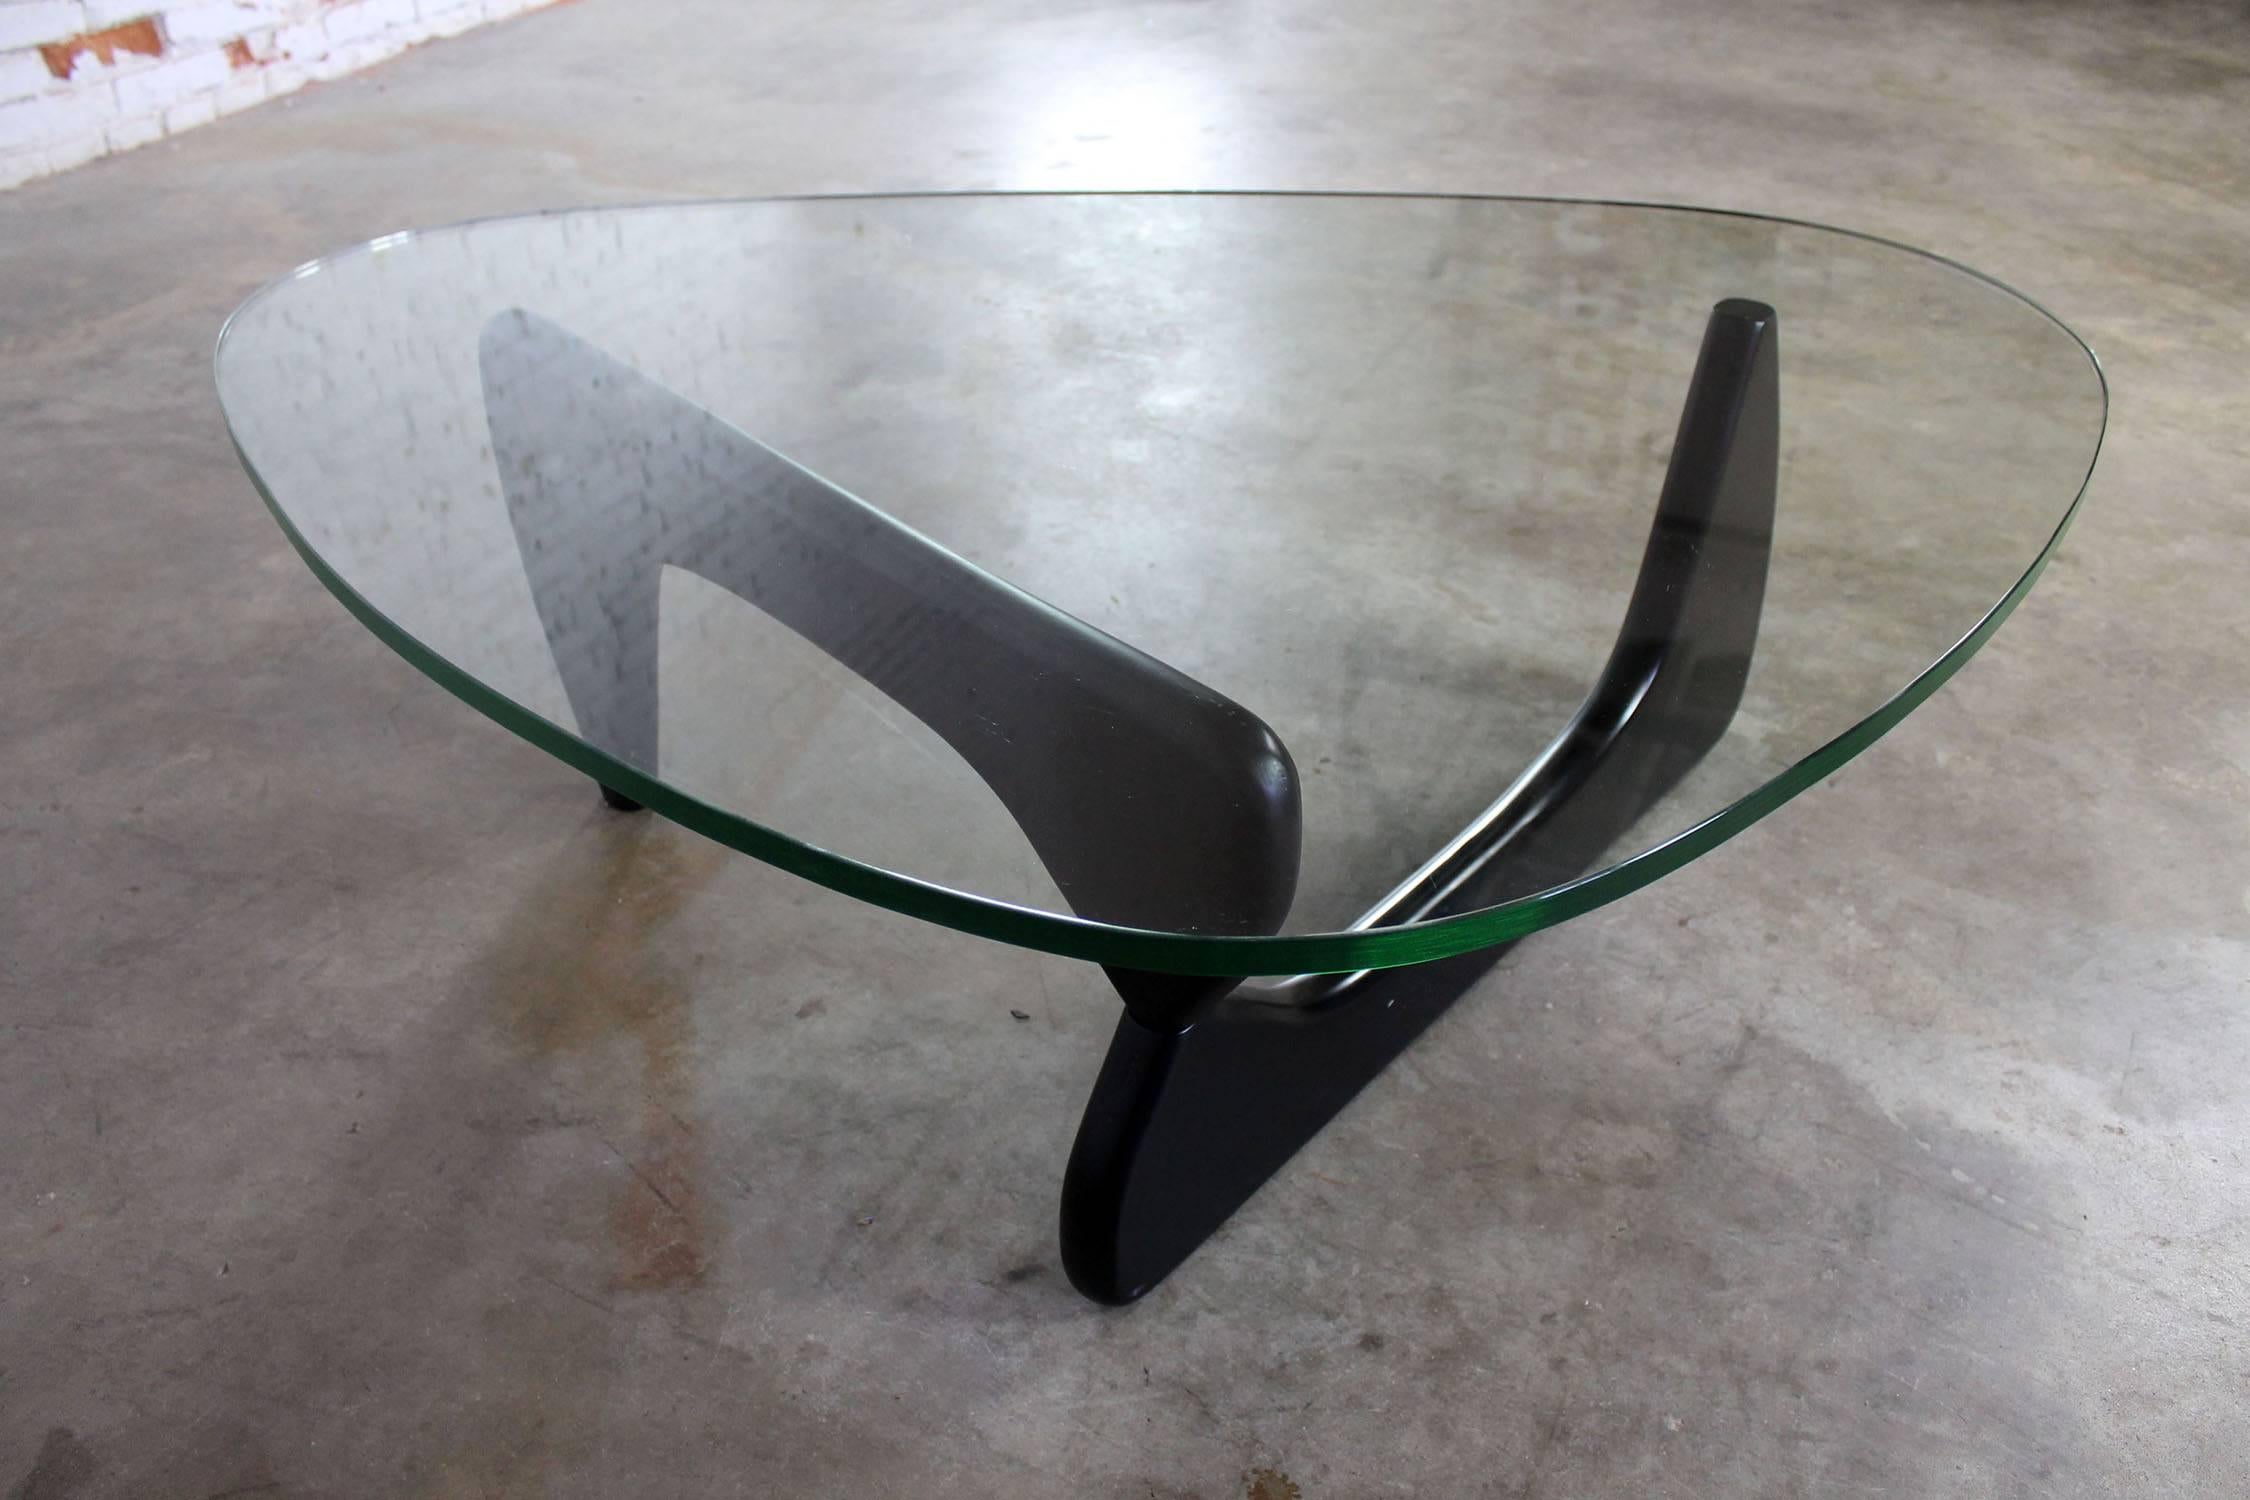 Classic Isamu Noguchi IN-50 black coffee table in very good vintage condition.

What can get more Classic Mid-Century design than a Noguchi coffee table? This one is vintage and we believe, circa 1980. It is in wonderful condition. No markings to